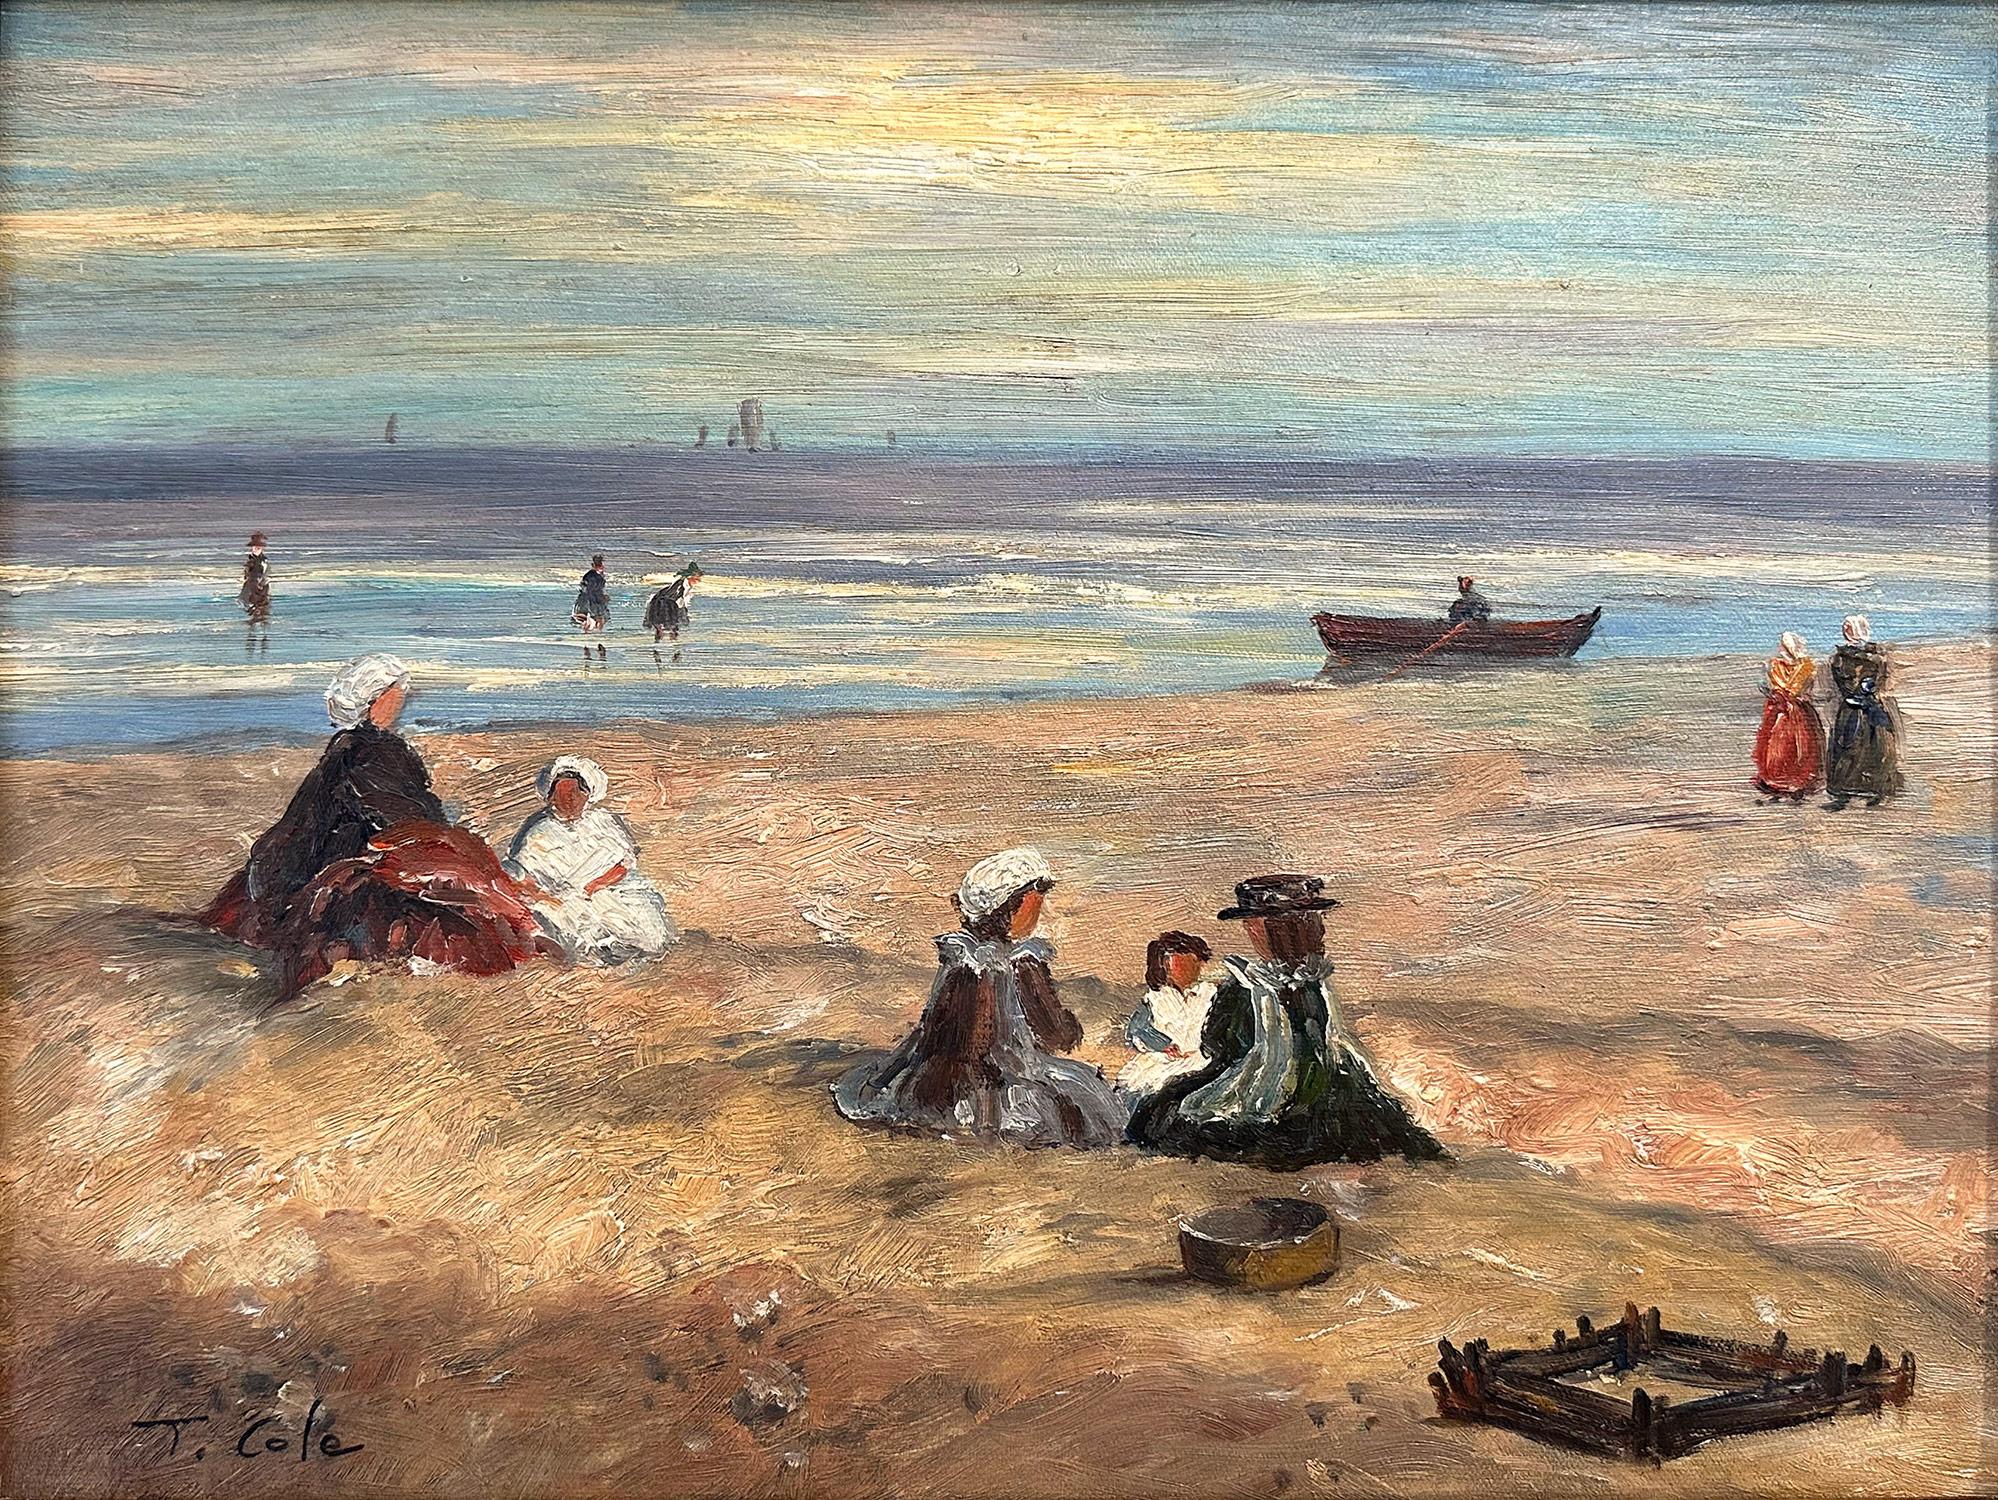 A stunning oil painting beach scene depicting figures on the sand on a sunny day in the 20th Century. The vibrant colors and impressionistic brushwork is done with both detail and precision. The figures are depicted with bold impressions and the